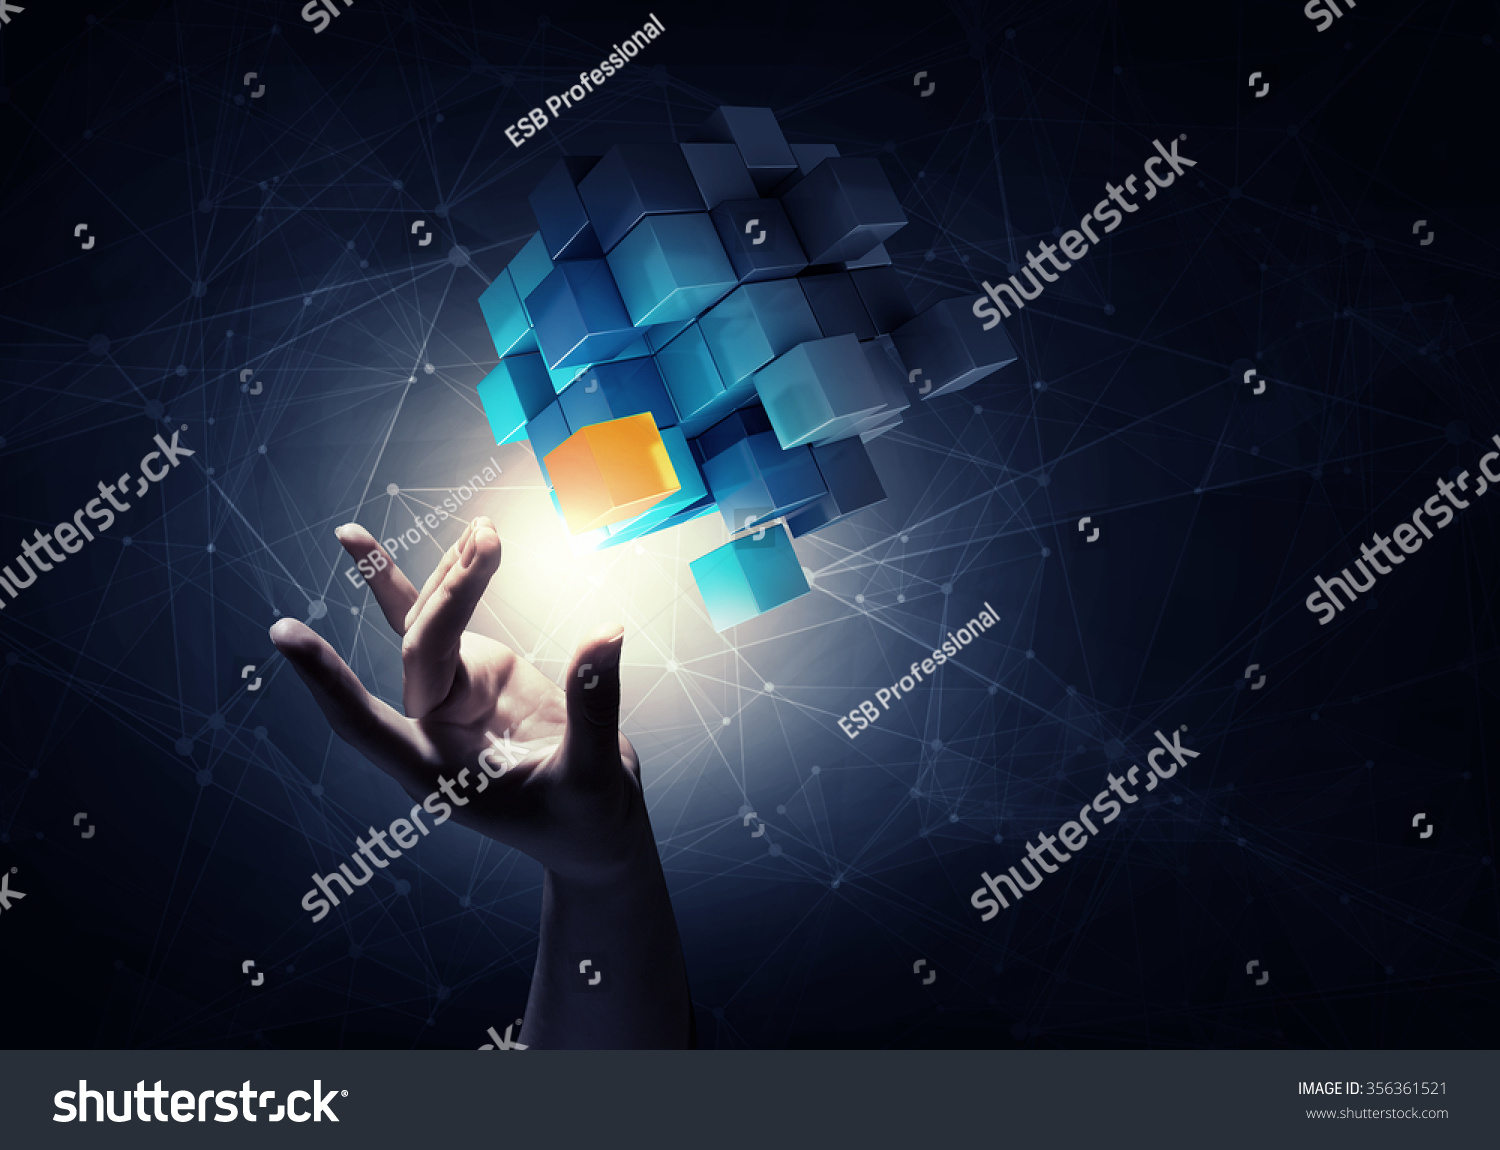 Businesswoman hand touch cube as symbol of problem solving  #356361521